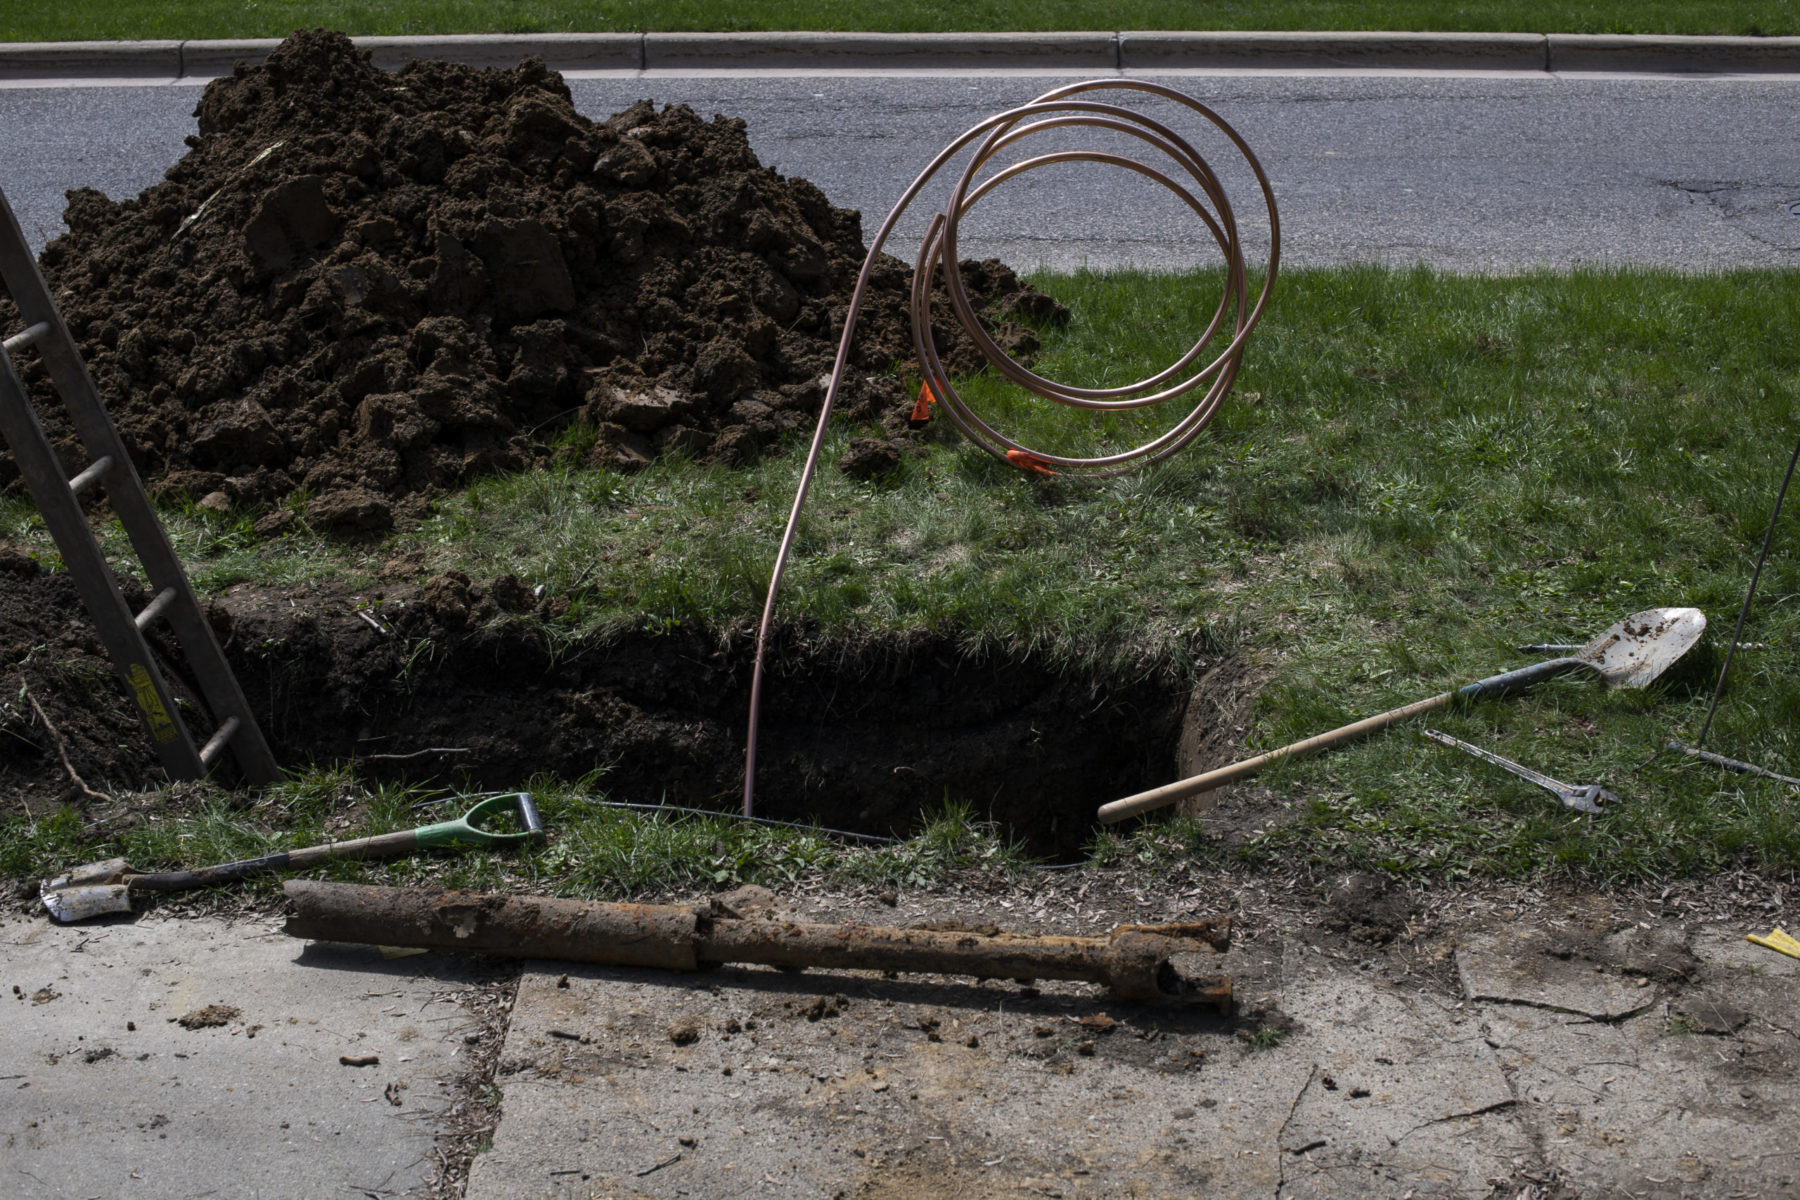 Wiring emerging from hole dug into the ground